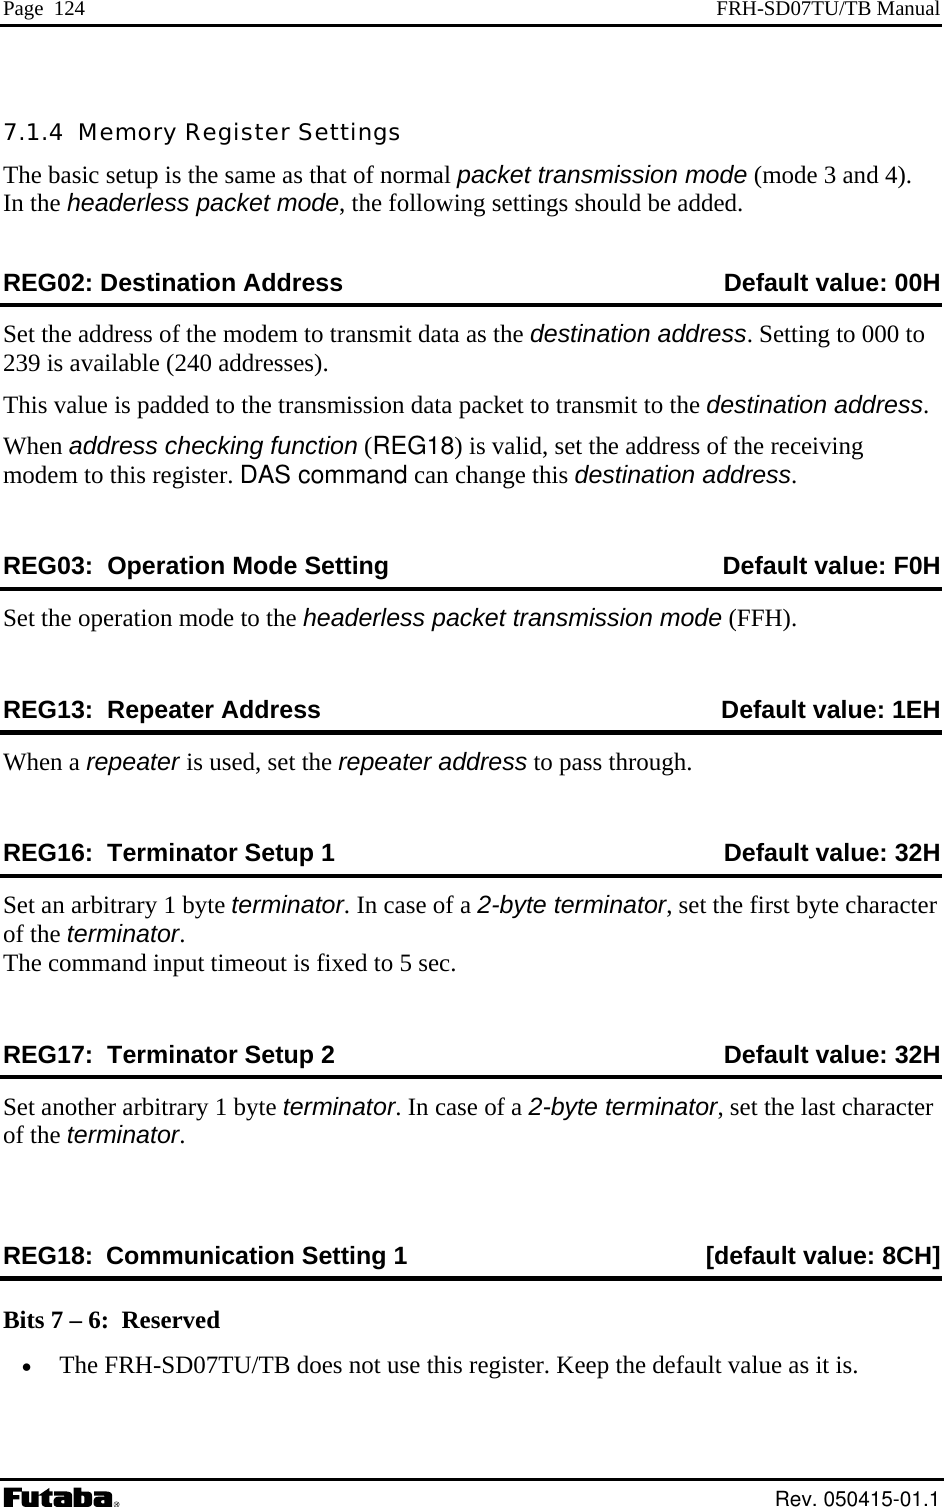 Page  124  FRH-SD07TU/TB Manual 7.1.4  Memory RegThe basic setup is the In the headerless packet mode, the following settings should be added.  ister Settings same as that of normal packet transmission mode (mode 3 and 4). REG02: Destination Address   Default value: 00HSet the address of the modem to transmit data as the destination address. Setting to 000 to ission data packet to transmit to the destination address.   18) is valid, set the address of the receiving odem mand can change this destination address. Default value: F0H 239 is available (240 addresses). This value is padded to the transmWhen address checking function (REGm  to this register. DAS comREG03:  Operation Mode Setting  Set the operation m e to the headerless packeREG13:  Repeater Address   Default valuod t transmission mode (FFH). e: 1EH When a repeater is used, set the repeater address to pass through. REG16:  Terminator Setup 1  Default value: 32H Set an arbitrary 1 byte teofTh m  in meout is fixed to 5 sec. REG17:  Terminator Setup 2  Default valuerminator. In case of a 2-byte terminator, set the first byte character  the terminator. e co mand put ti: 32H Set another arbitrary 1 byte terminator. In case of a 2-byte terminator, set the last of the terminator.  character REG18: Communication Setting 1  [default value: 8CH] Bits 7 – 6:  Reserved •  The FRH-SD07TU/TB does not use this register. Keep the default value as it is.  Rev. 050415-01.1 